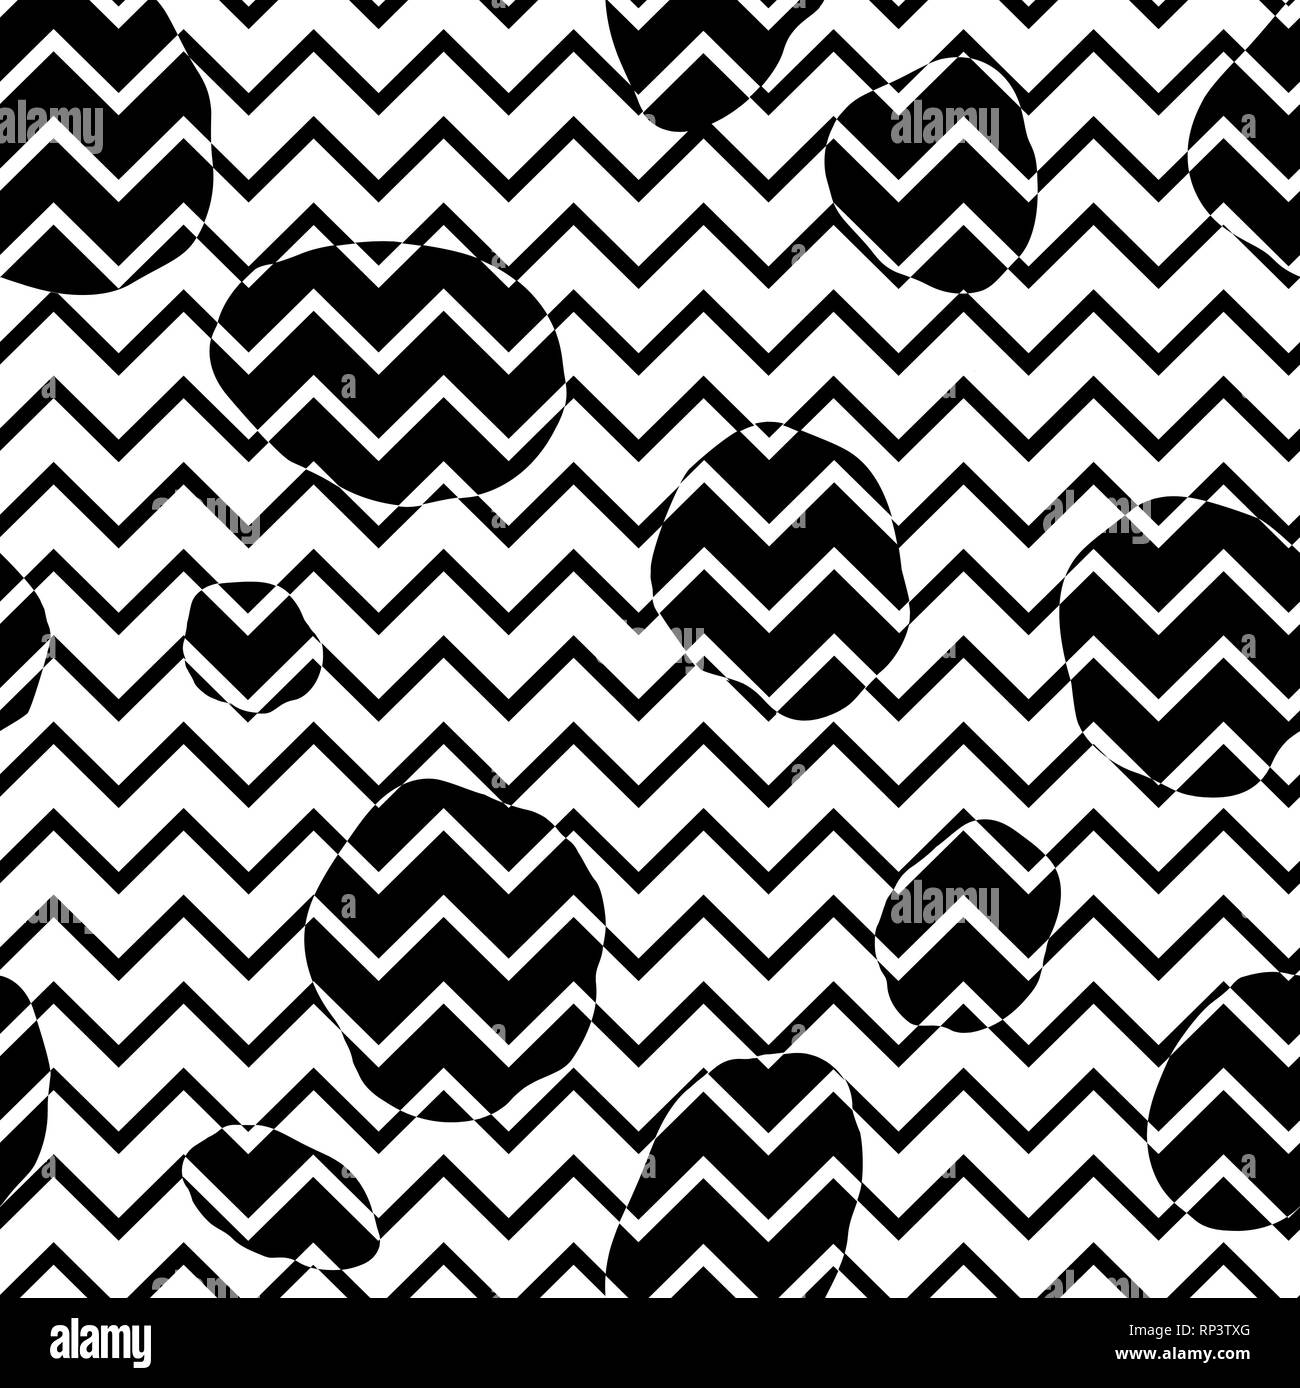 Abstact seamless pattern. Zig-zag line and dot texture. Diagonal